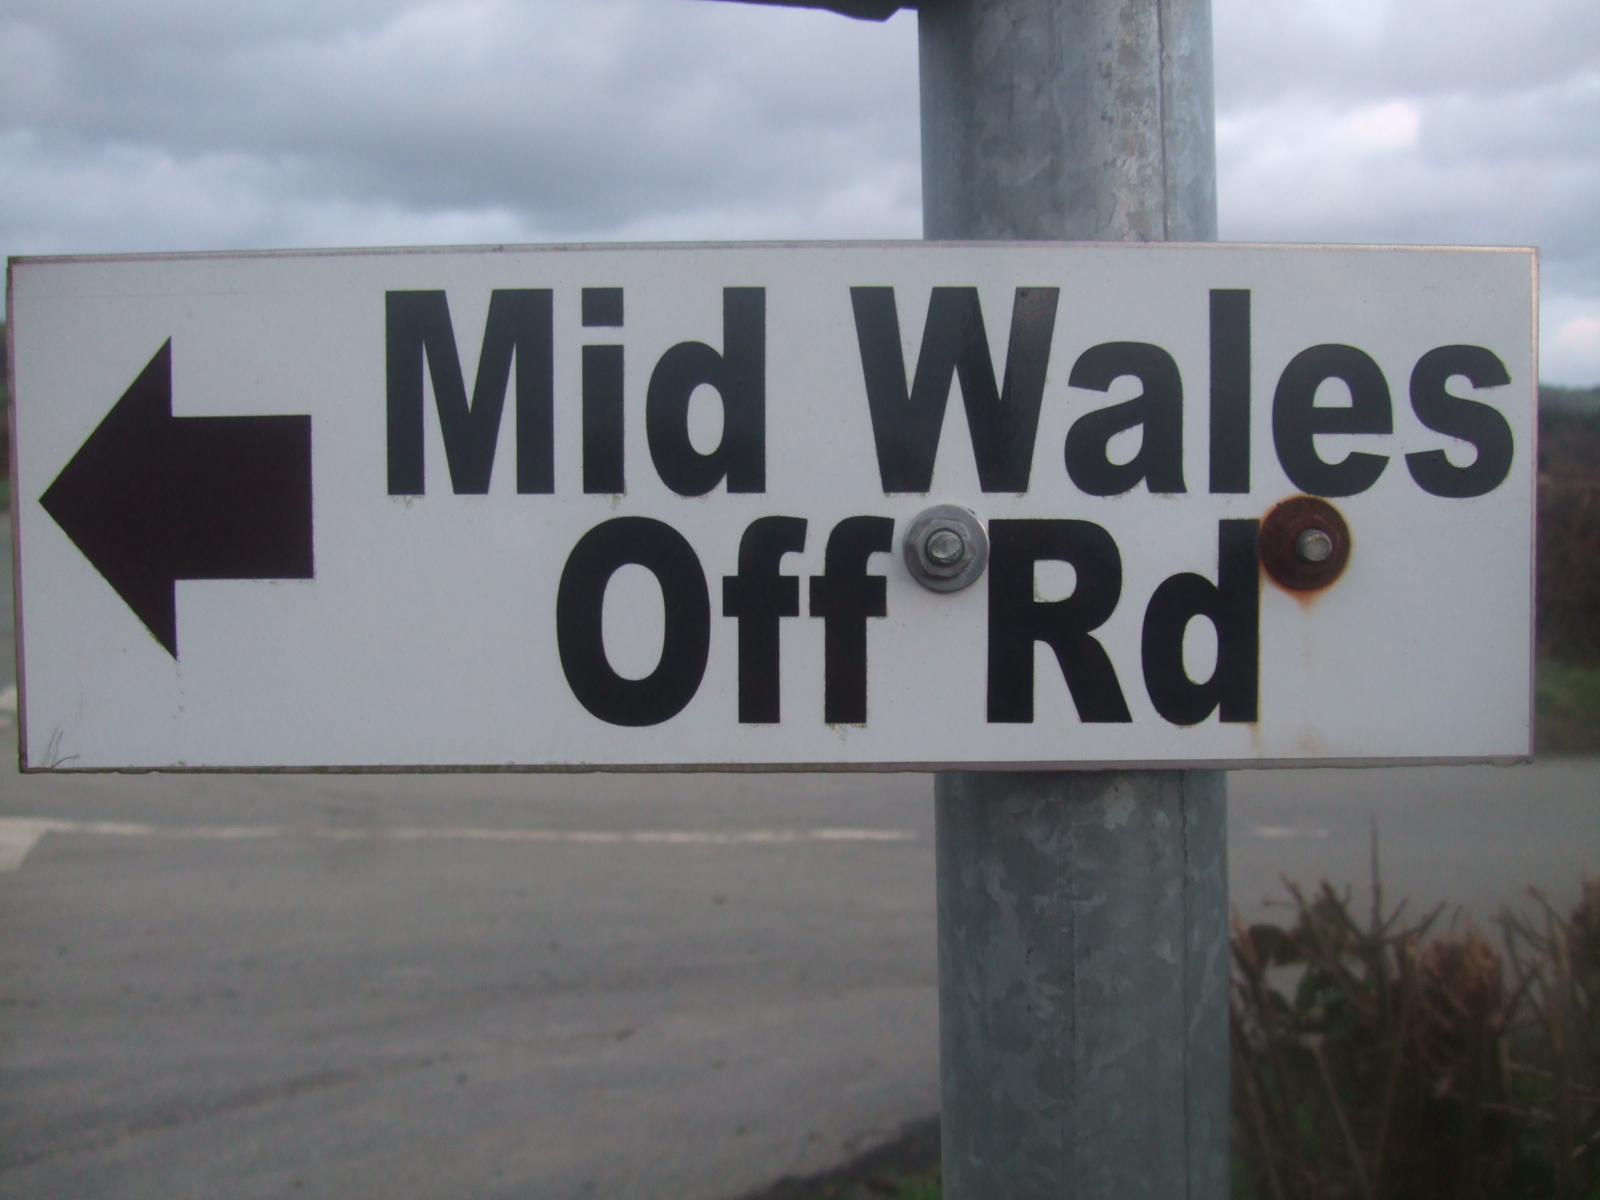 Follow the signs for Mid Wales Off Road Rally Karting